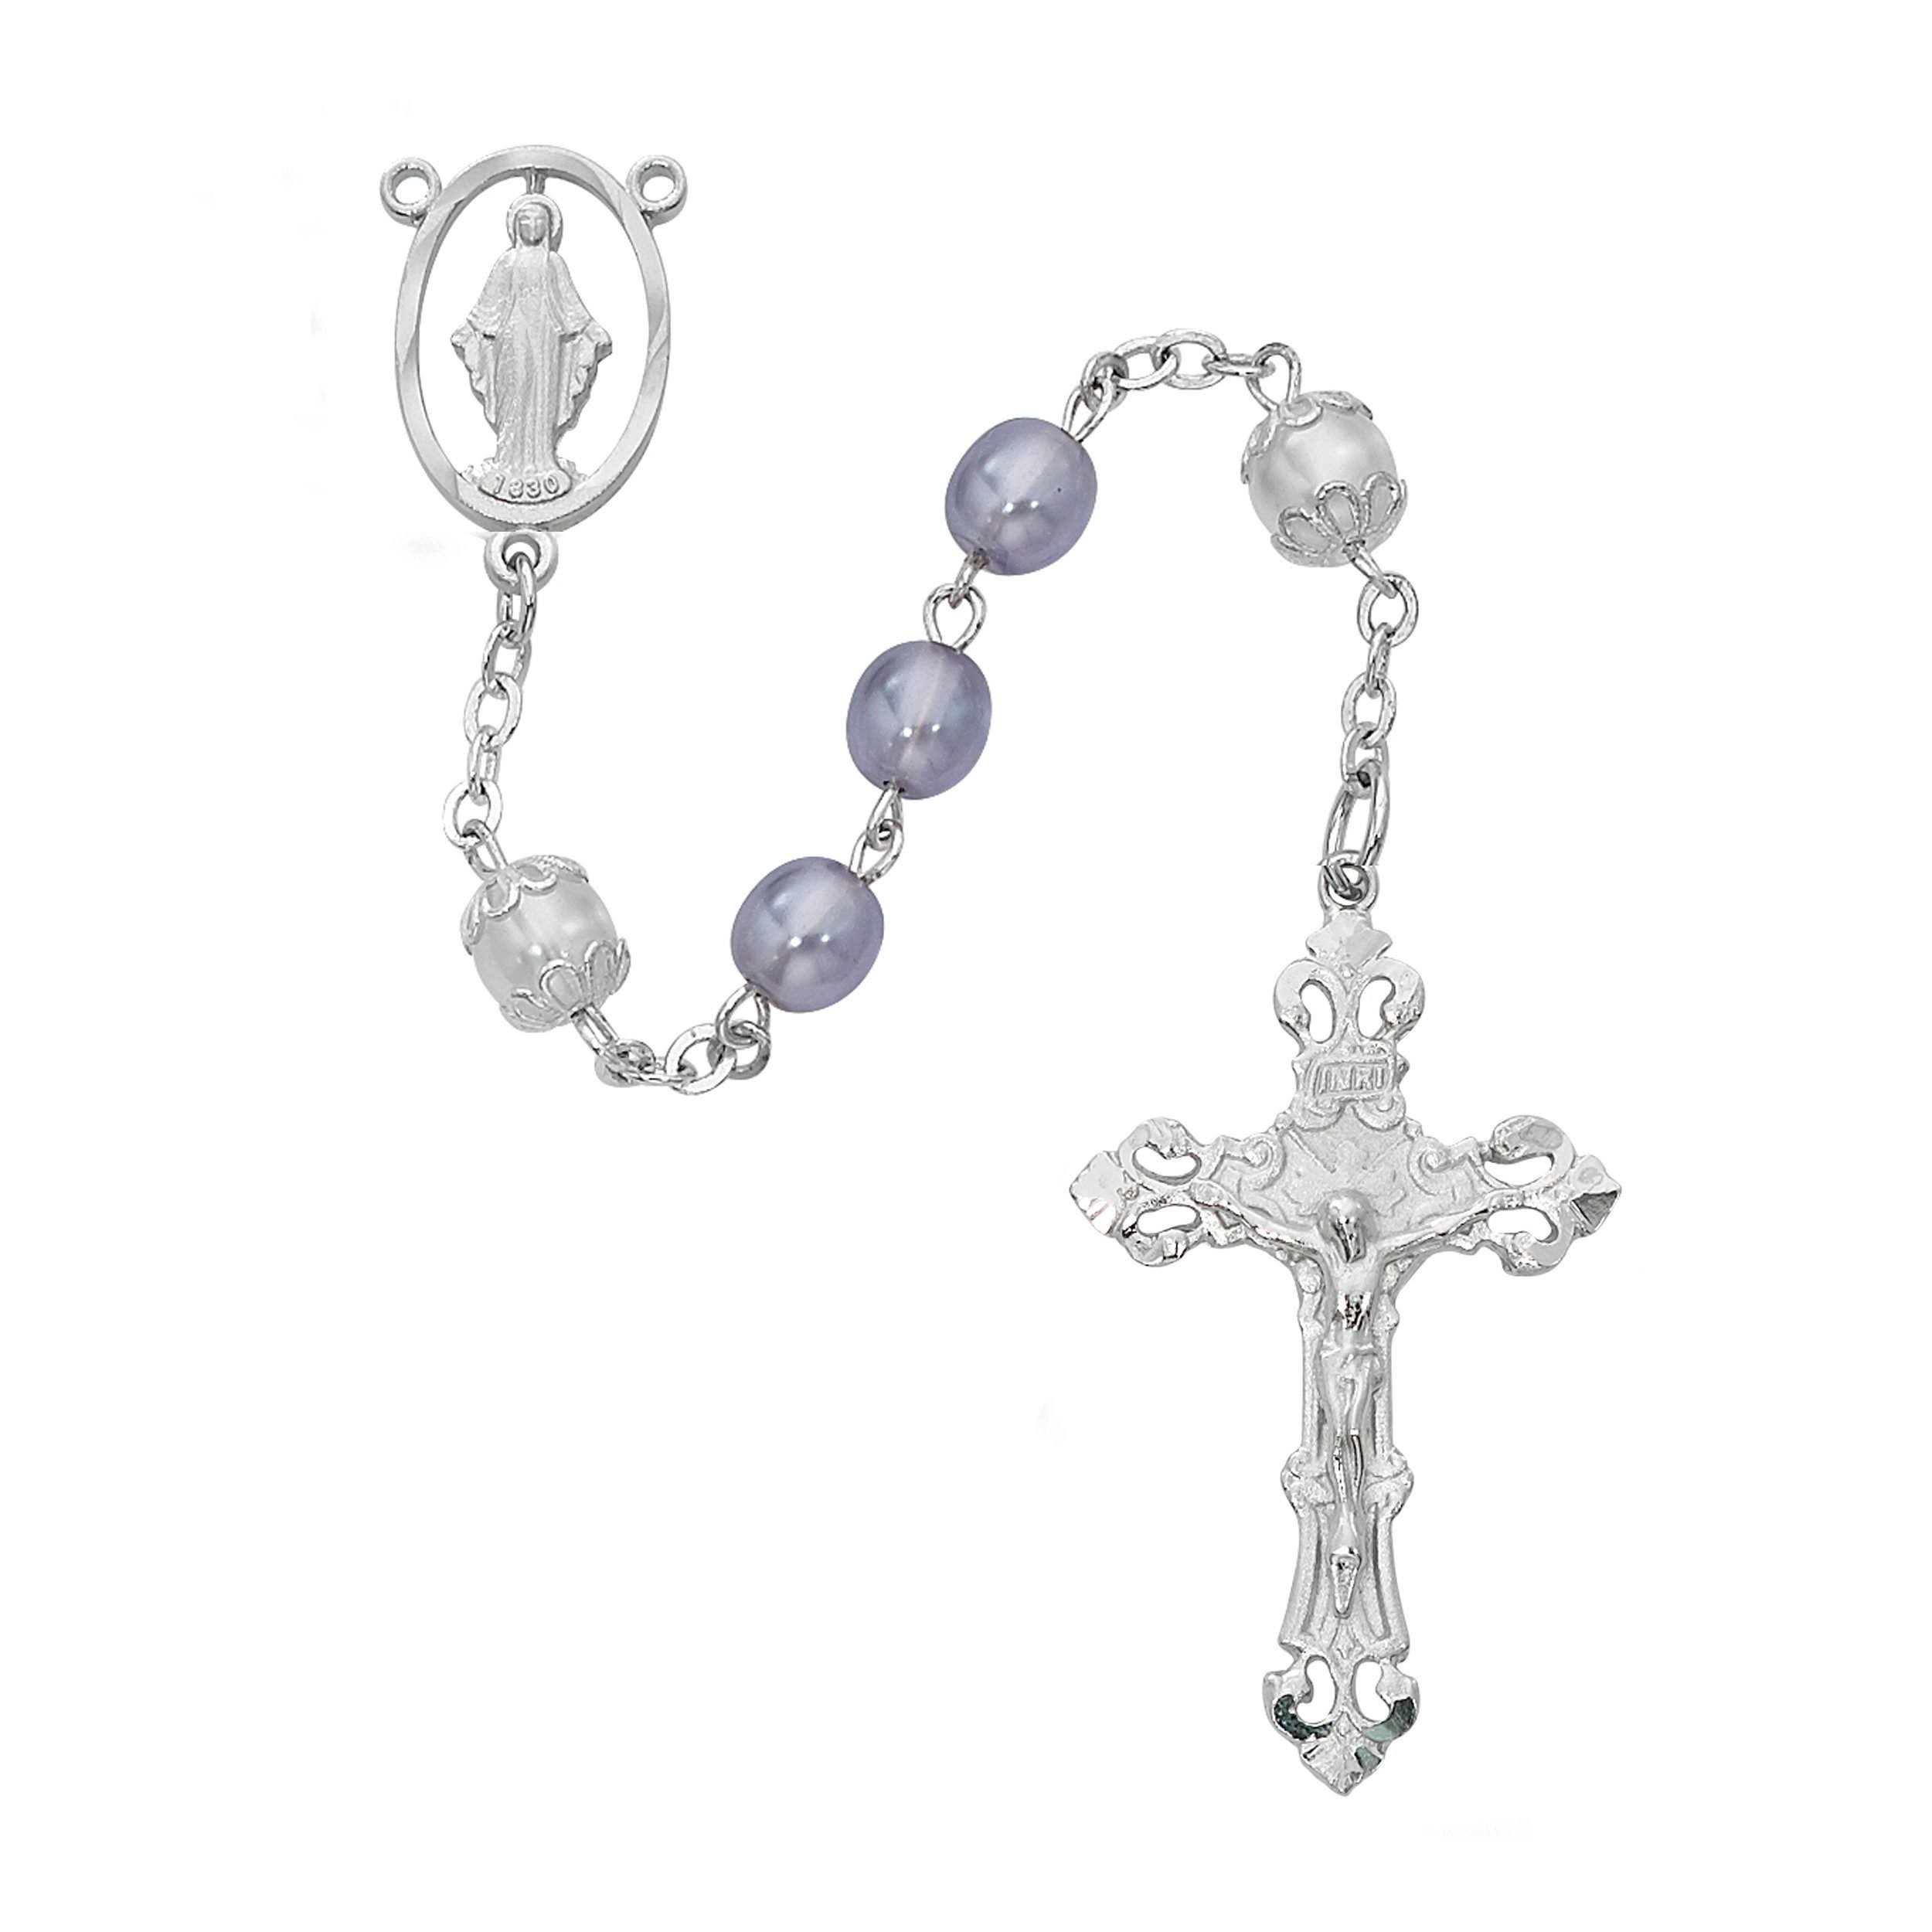 McVan R751F 7 mm Our Father Cross Rosary Set - Lavender & White